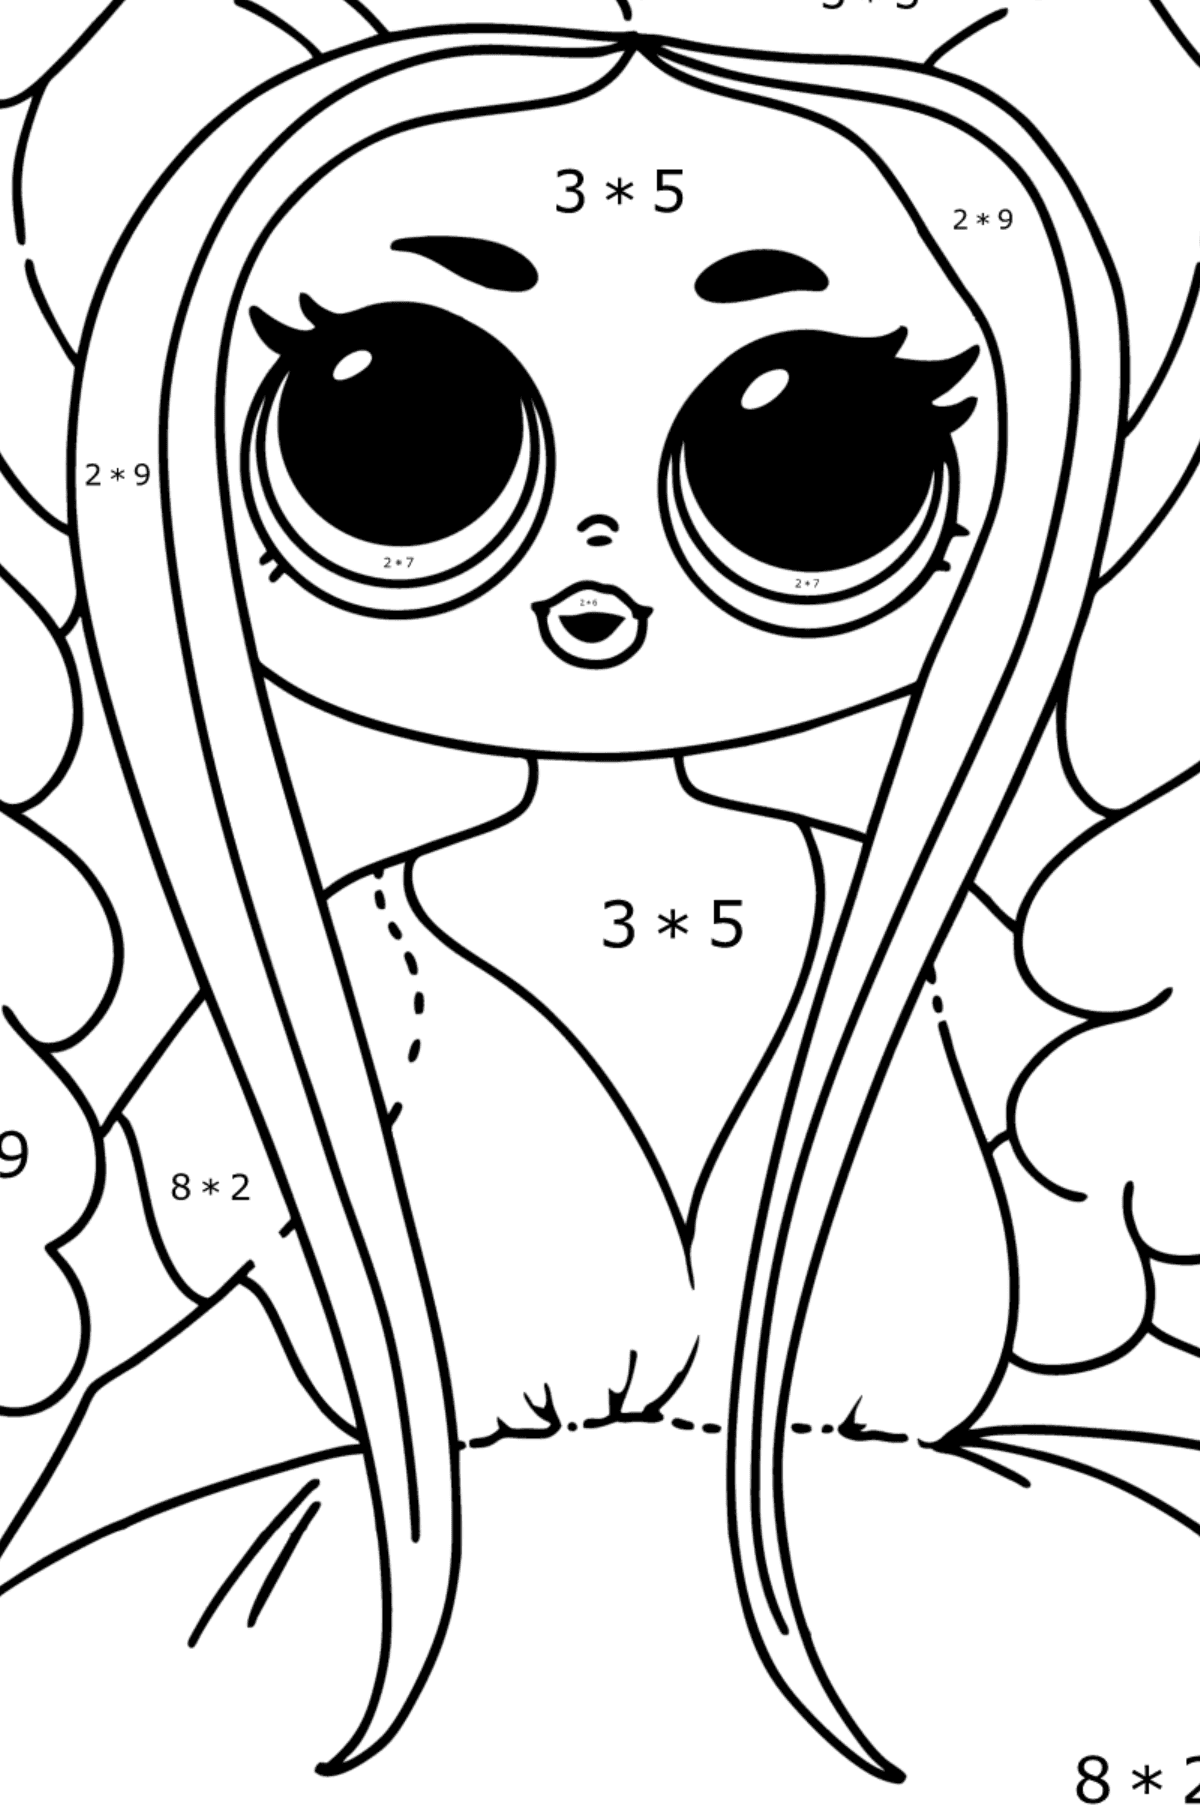 Coloring page LOL OMG Honeylicious Doll - Math Coloring - Multiplication for Kids